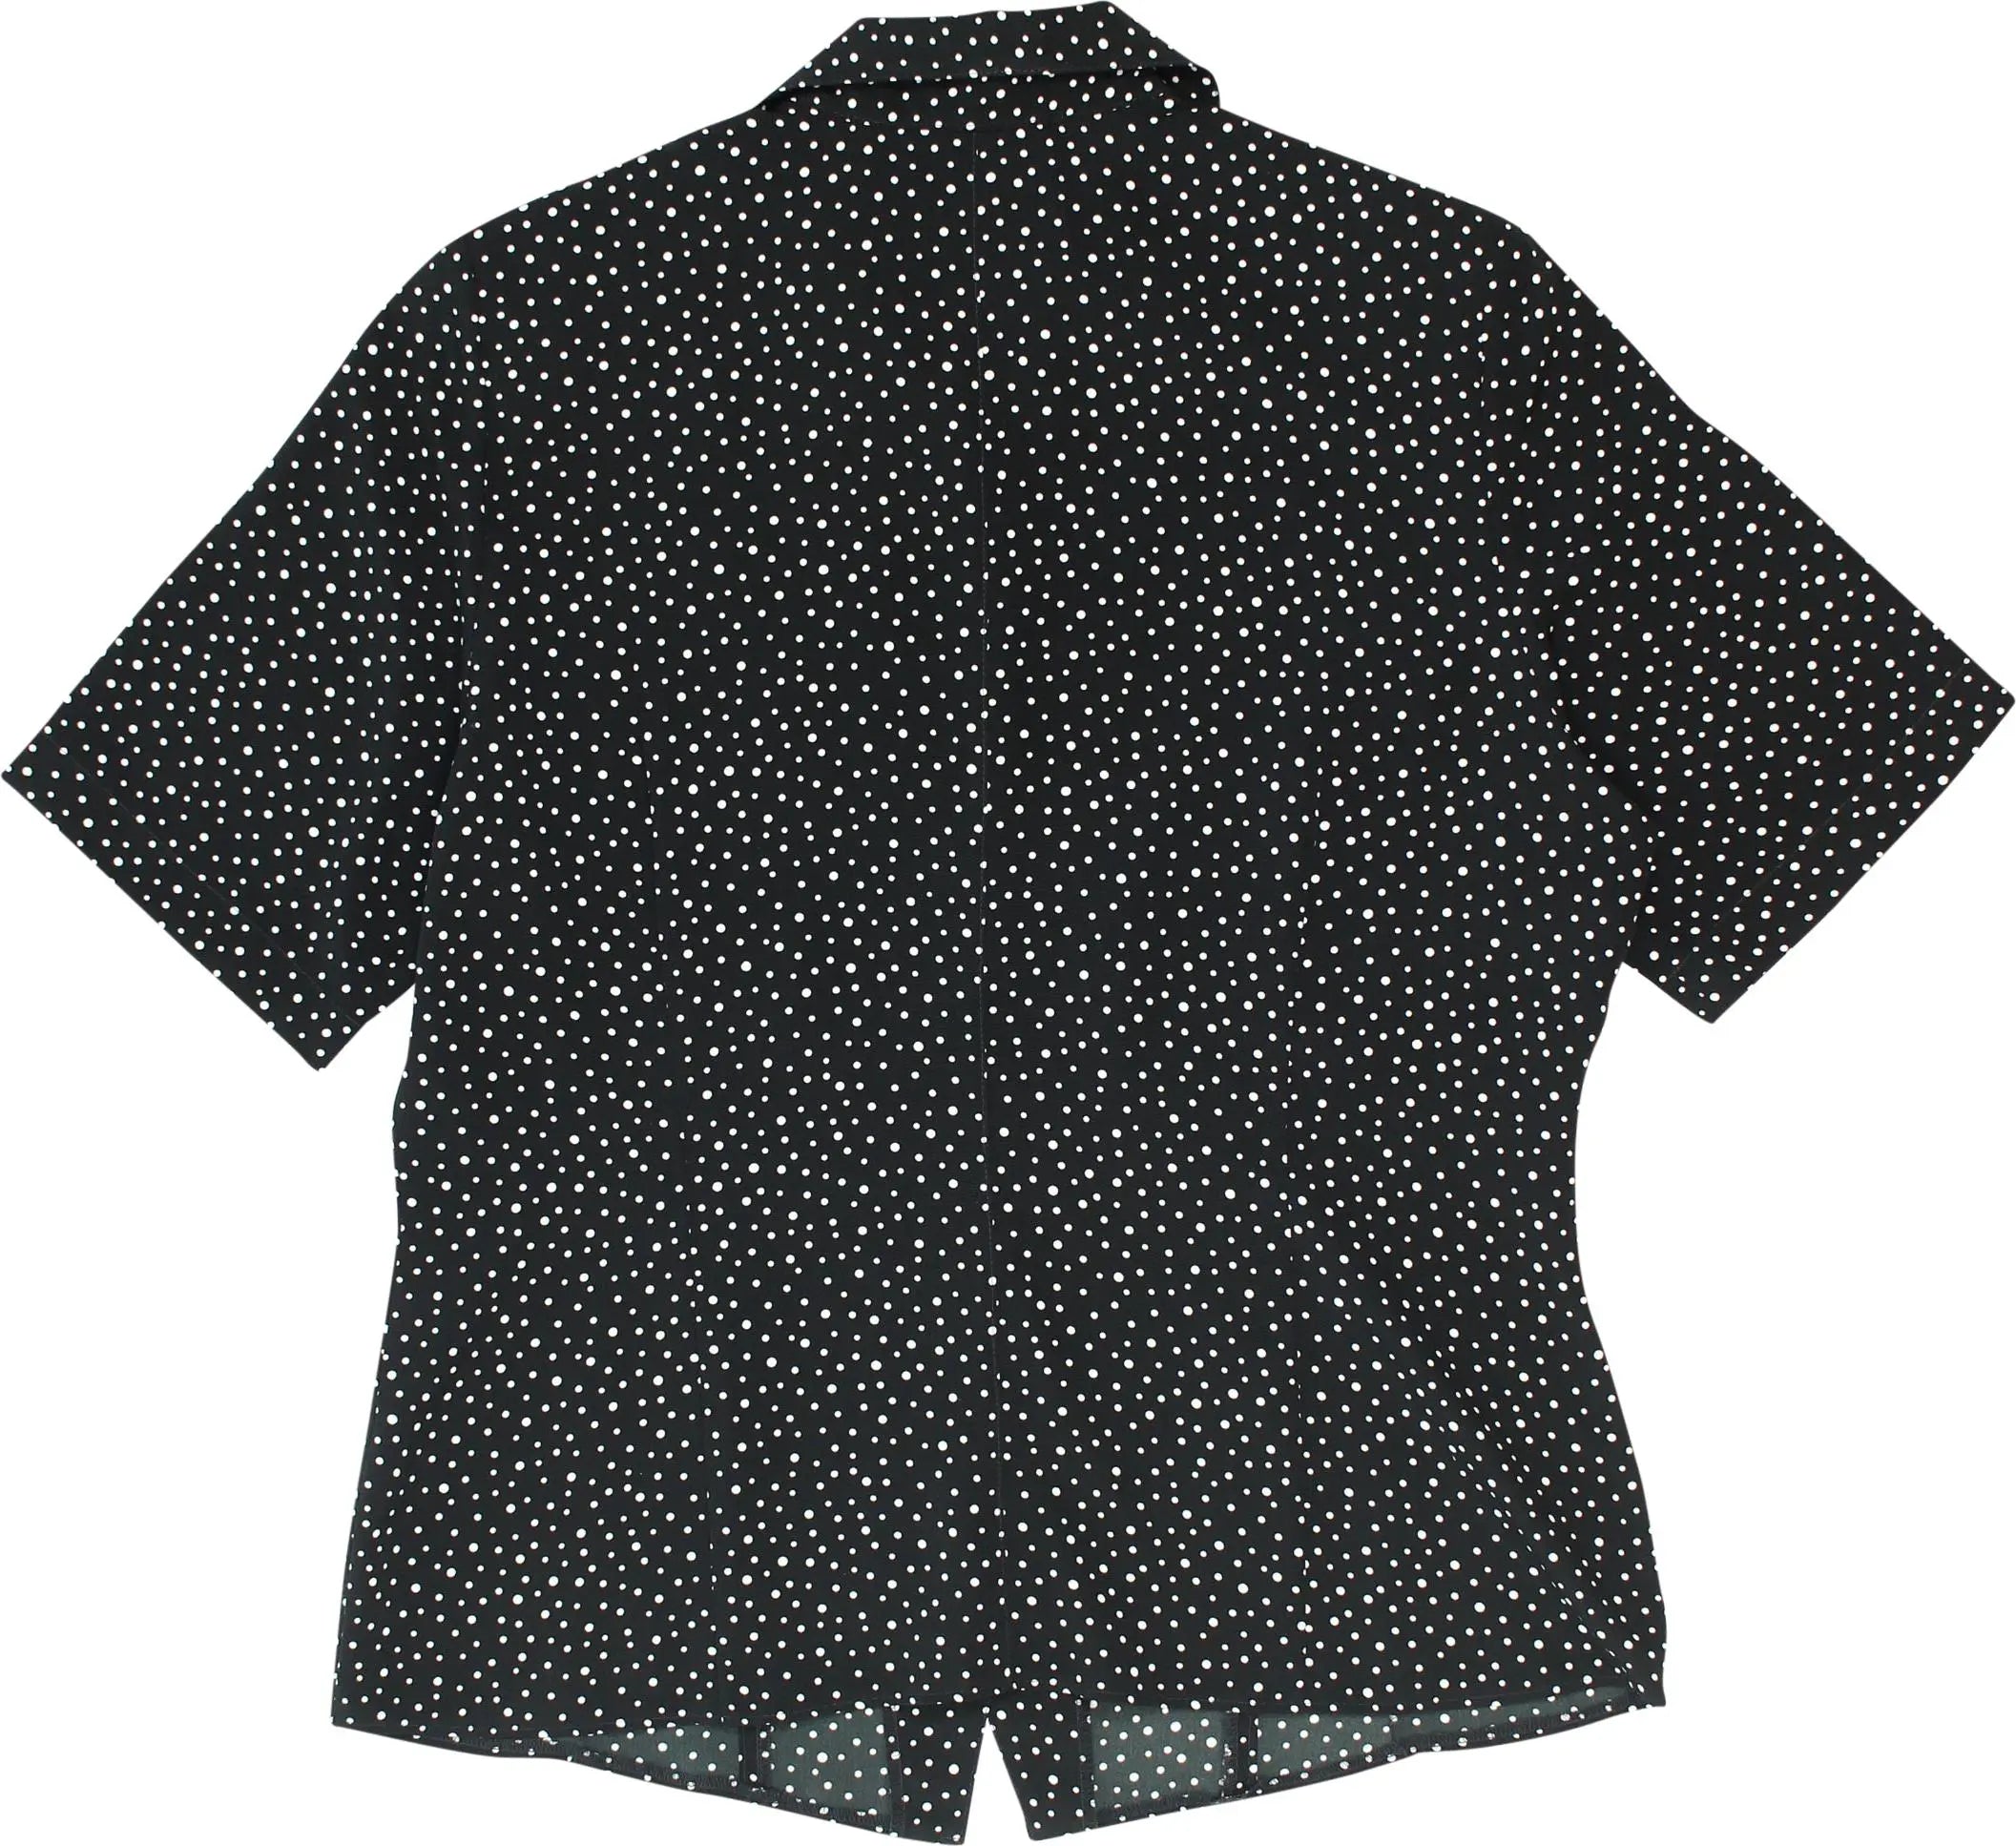 Fashion Classics - 80s Polkadot Shirt- ThriftTale.com - Vintage and second handclothing